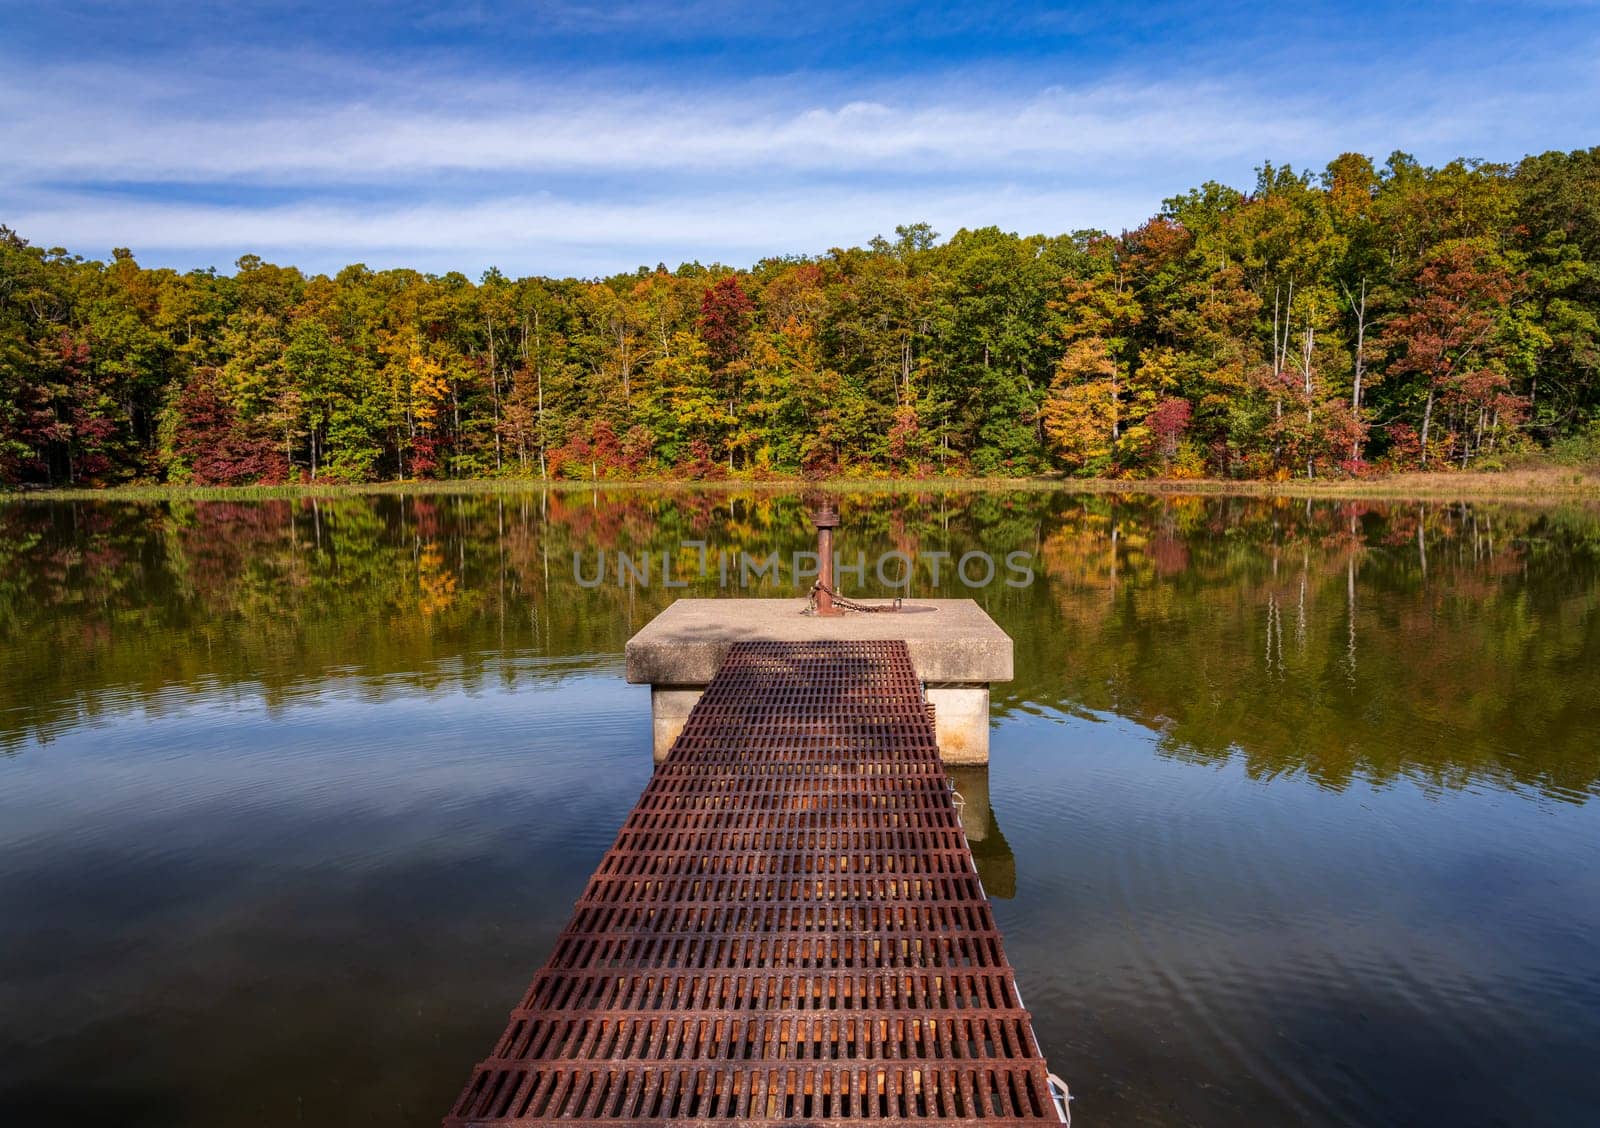 Changing leaves in autumn with metal walkway and platform in calm reservoir in Coopers Rock State Forest near Morgantown, WV